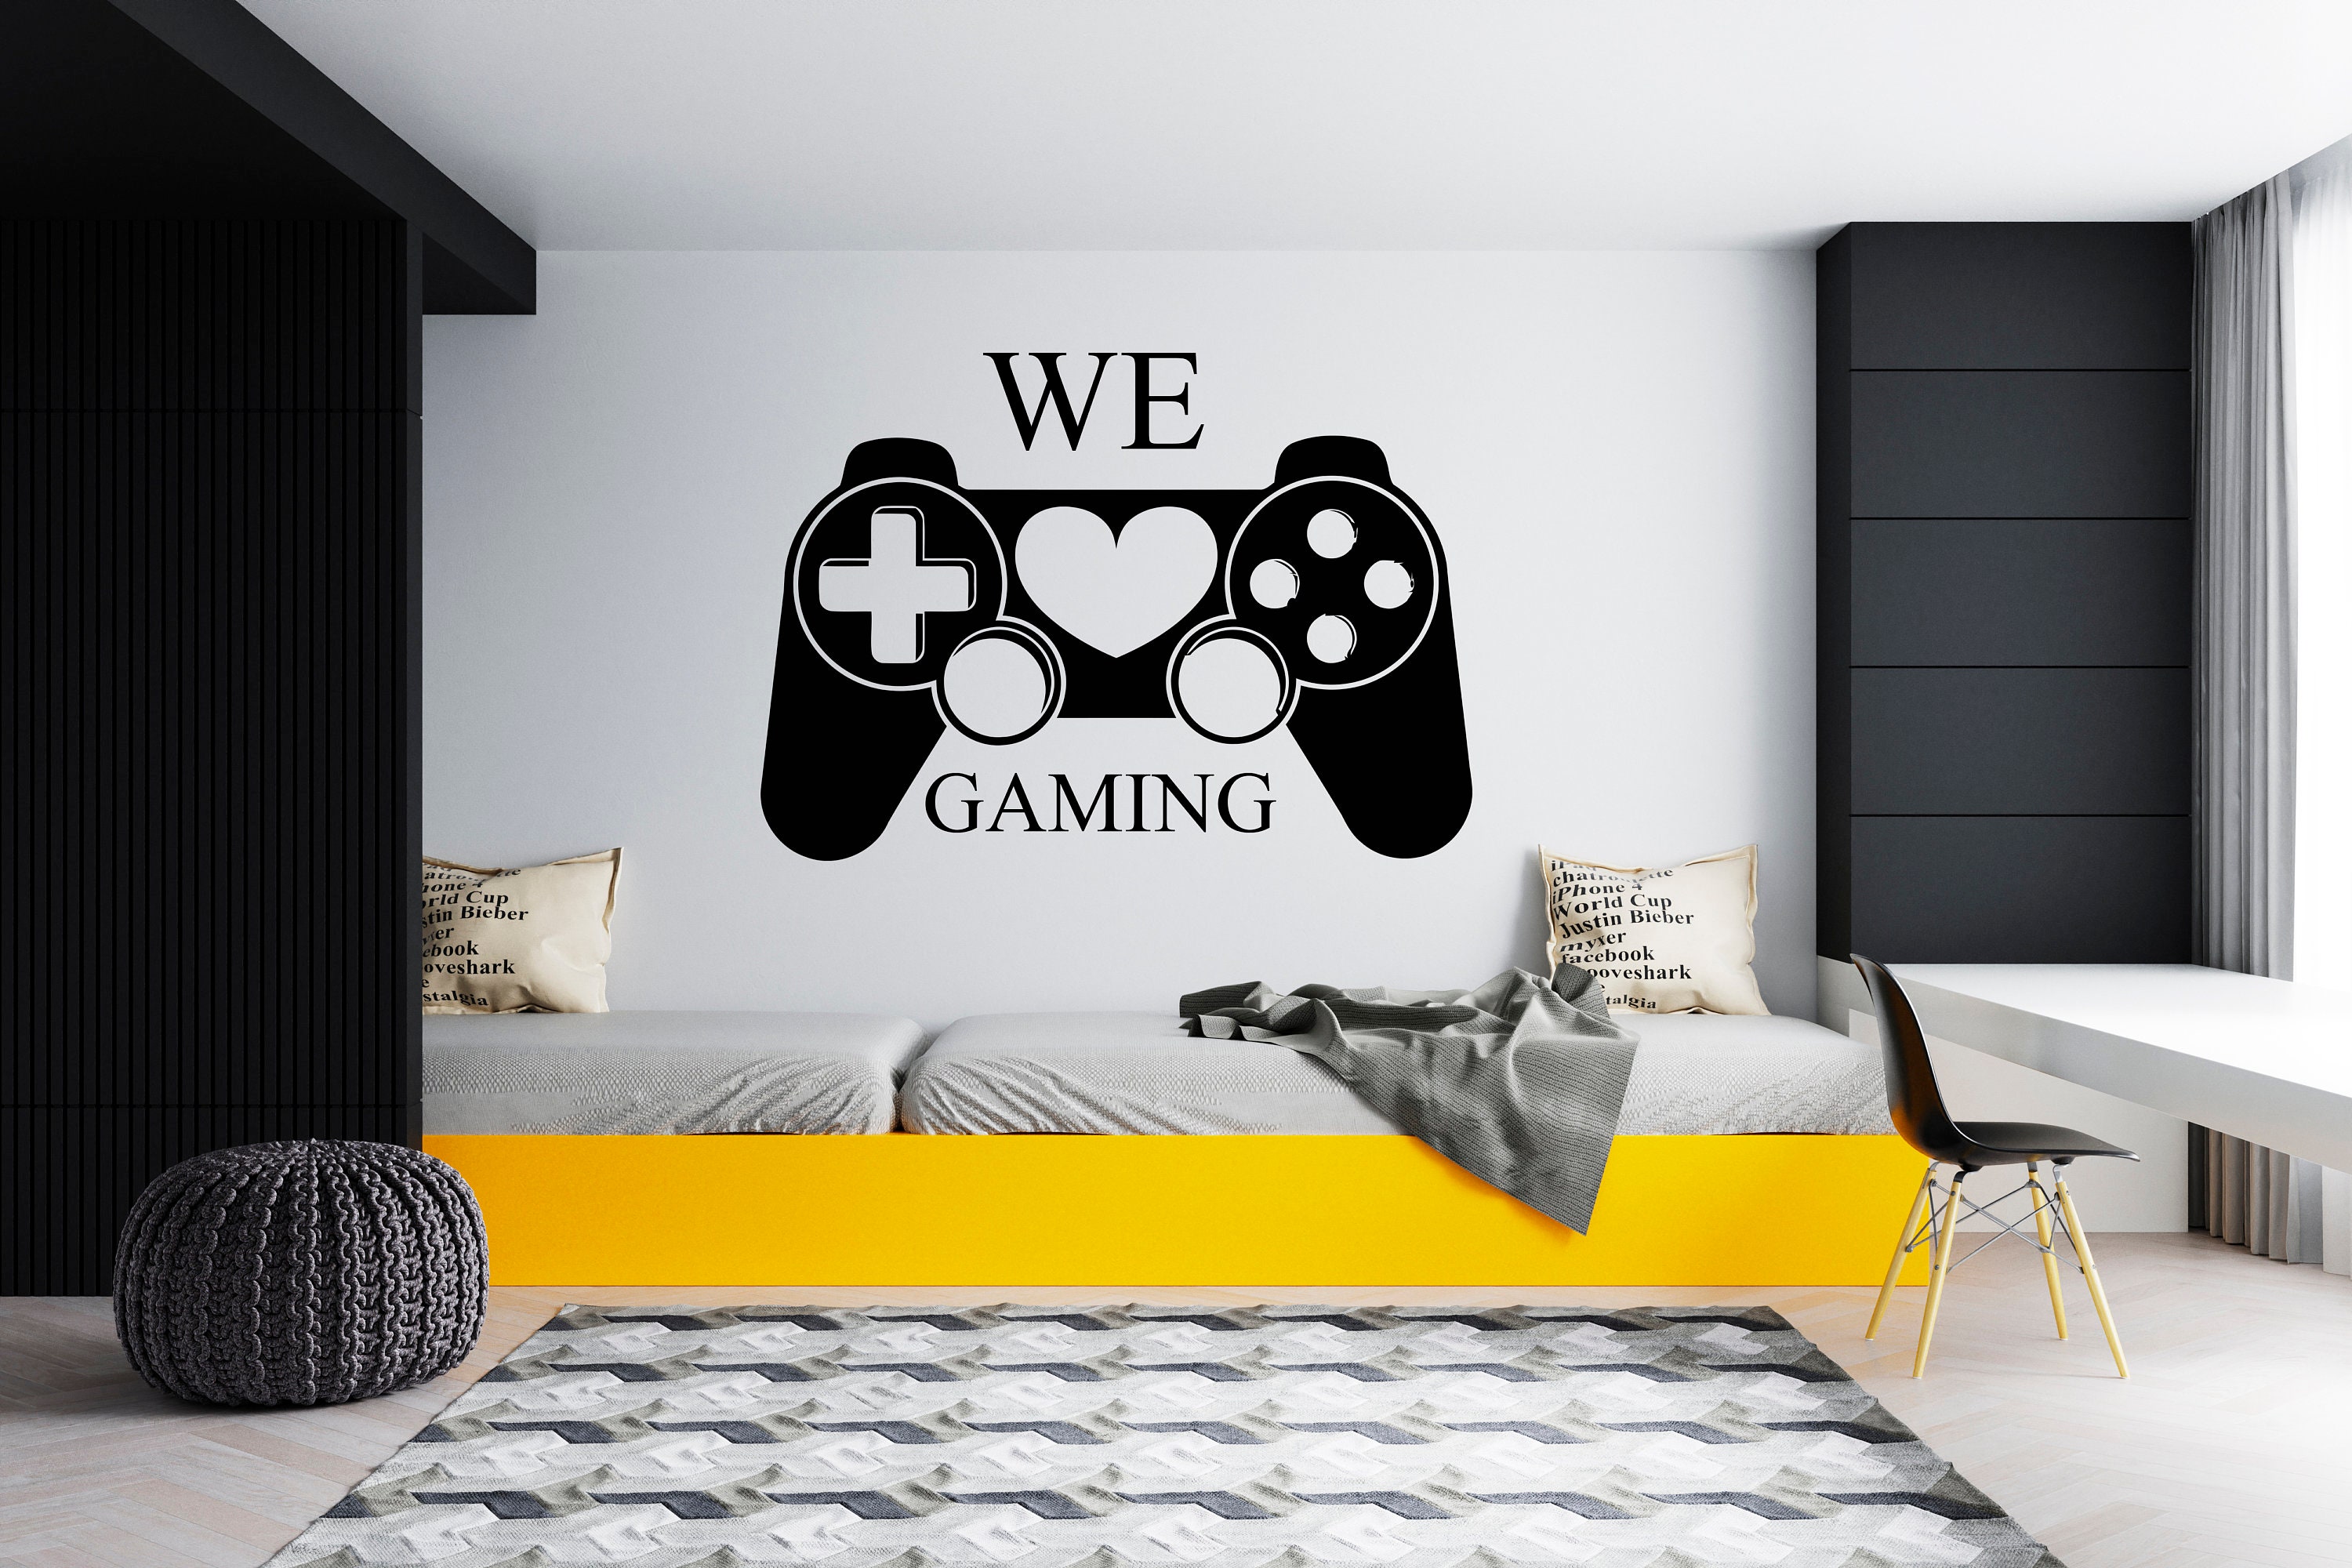 New Gamer Wall Sticker For Game Room Decor Kids Room Decoration Bedroom  Decor Door Vinyl Stickers Mural Gaming Poster